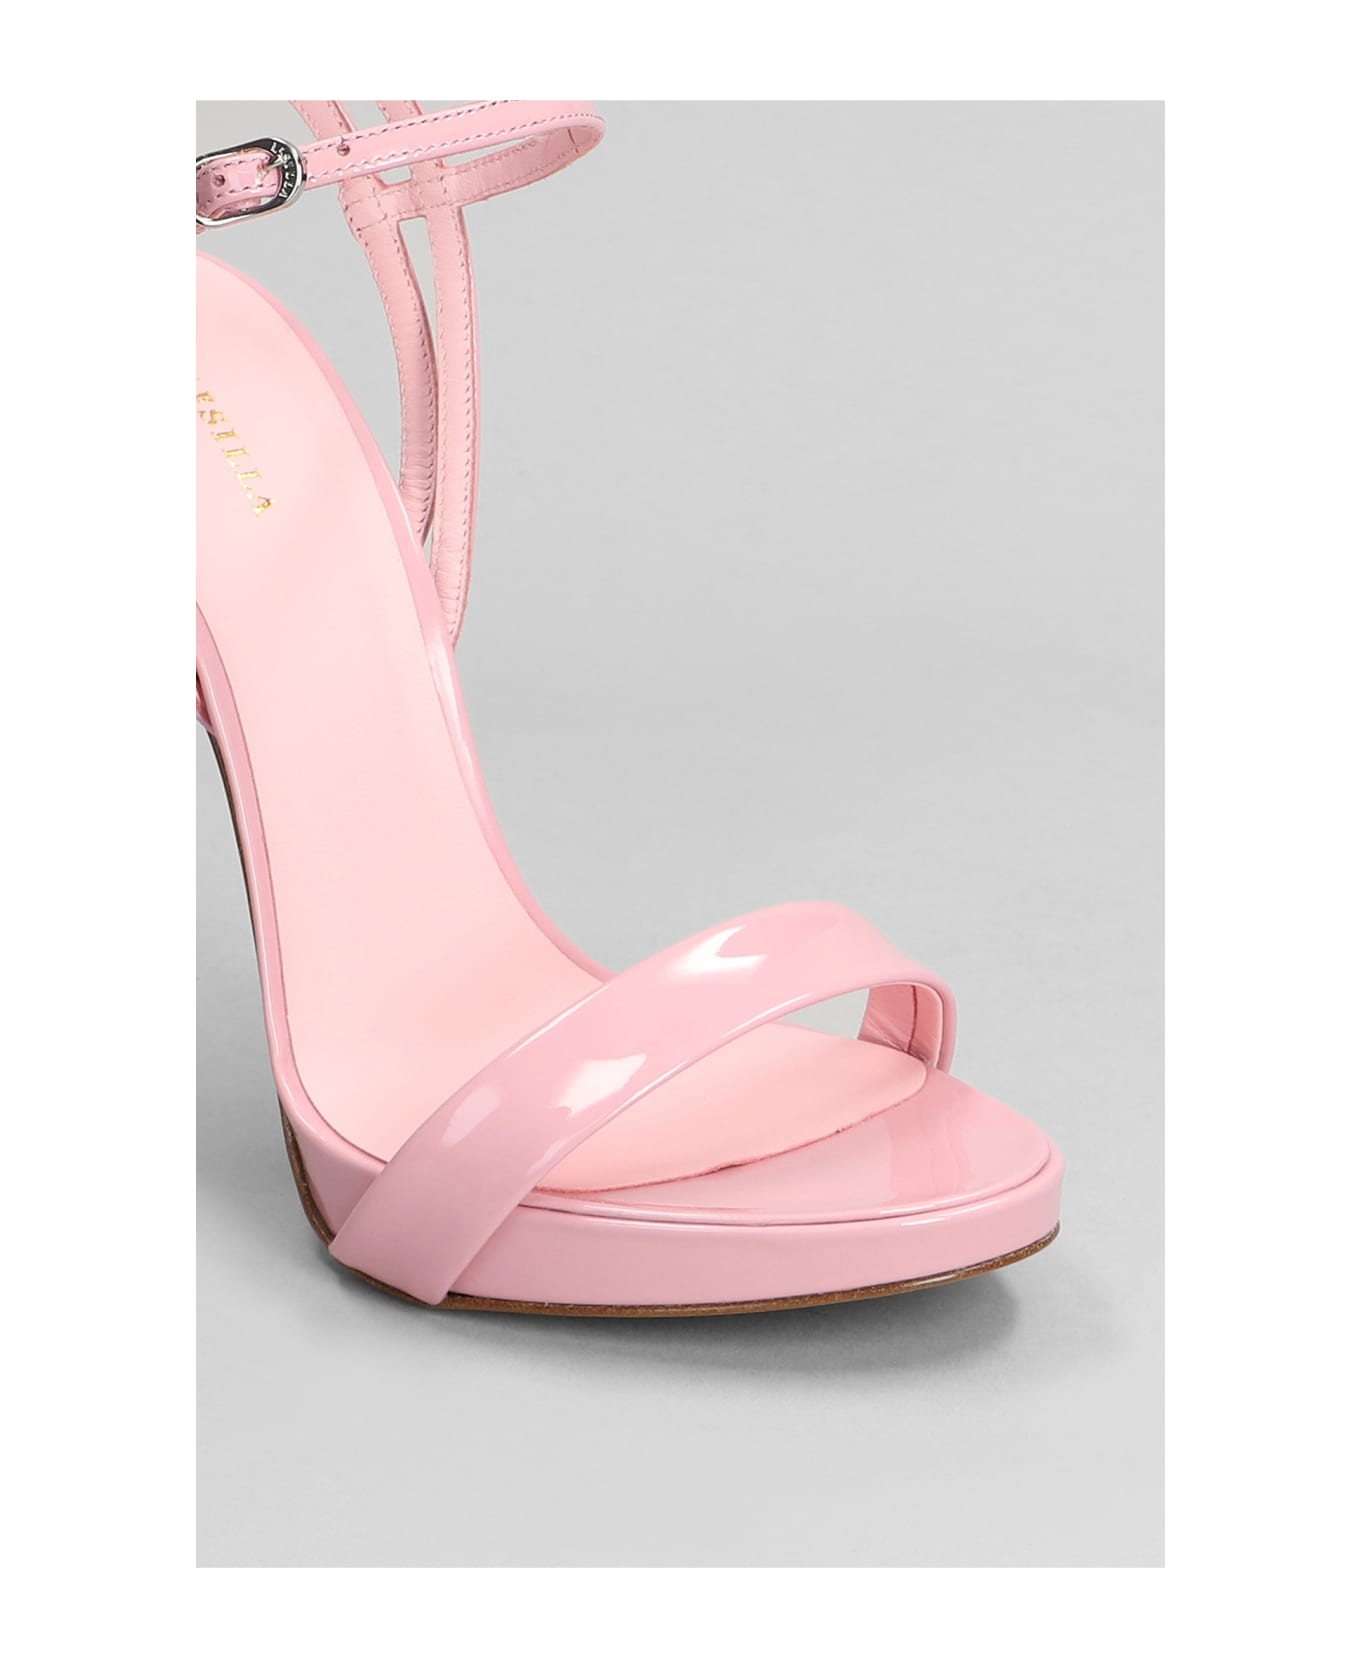 Le Silla Gwen Sandals In Rose-pink Patent Leather - rose-pink サンダル